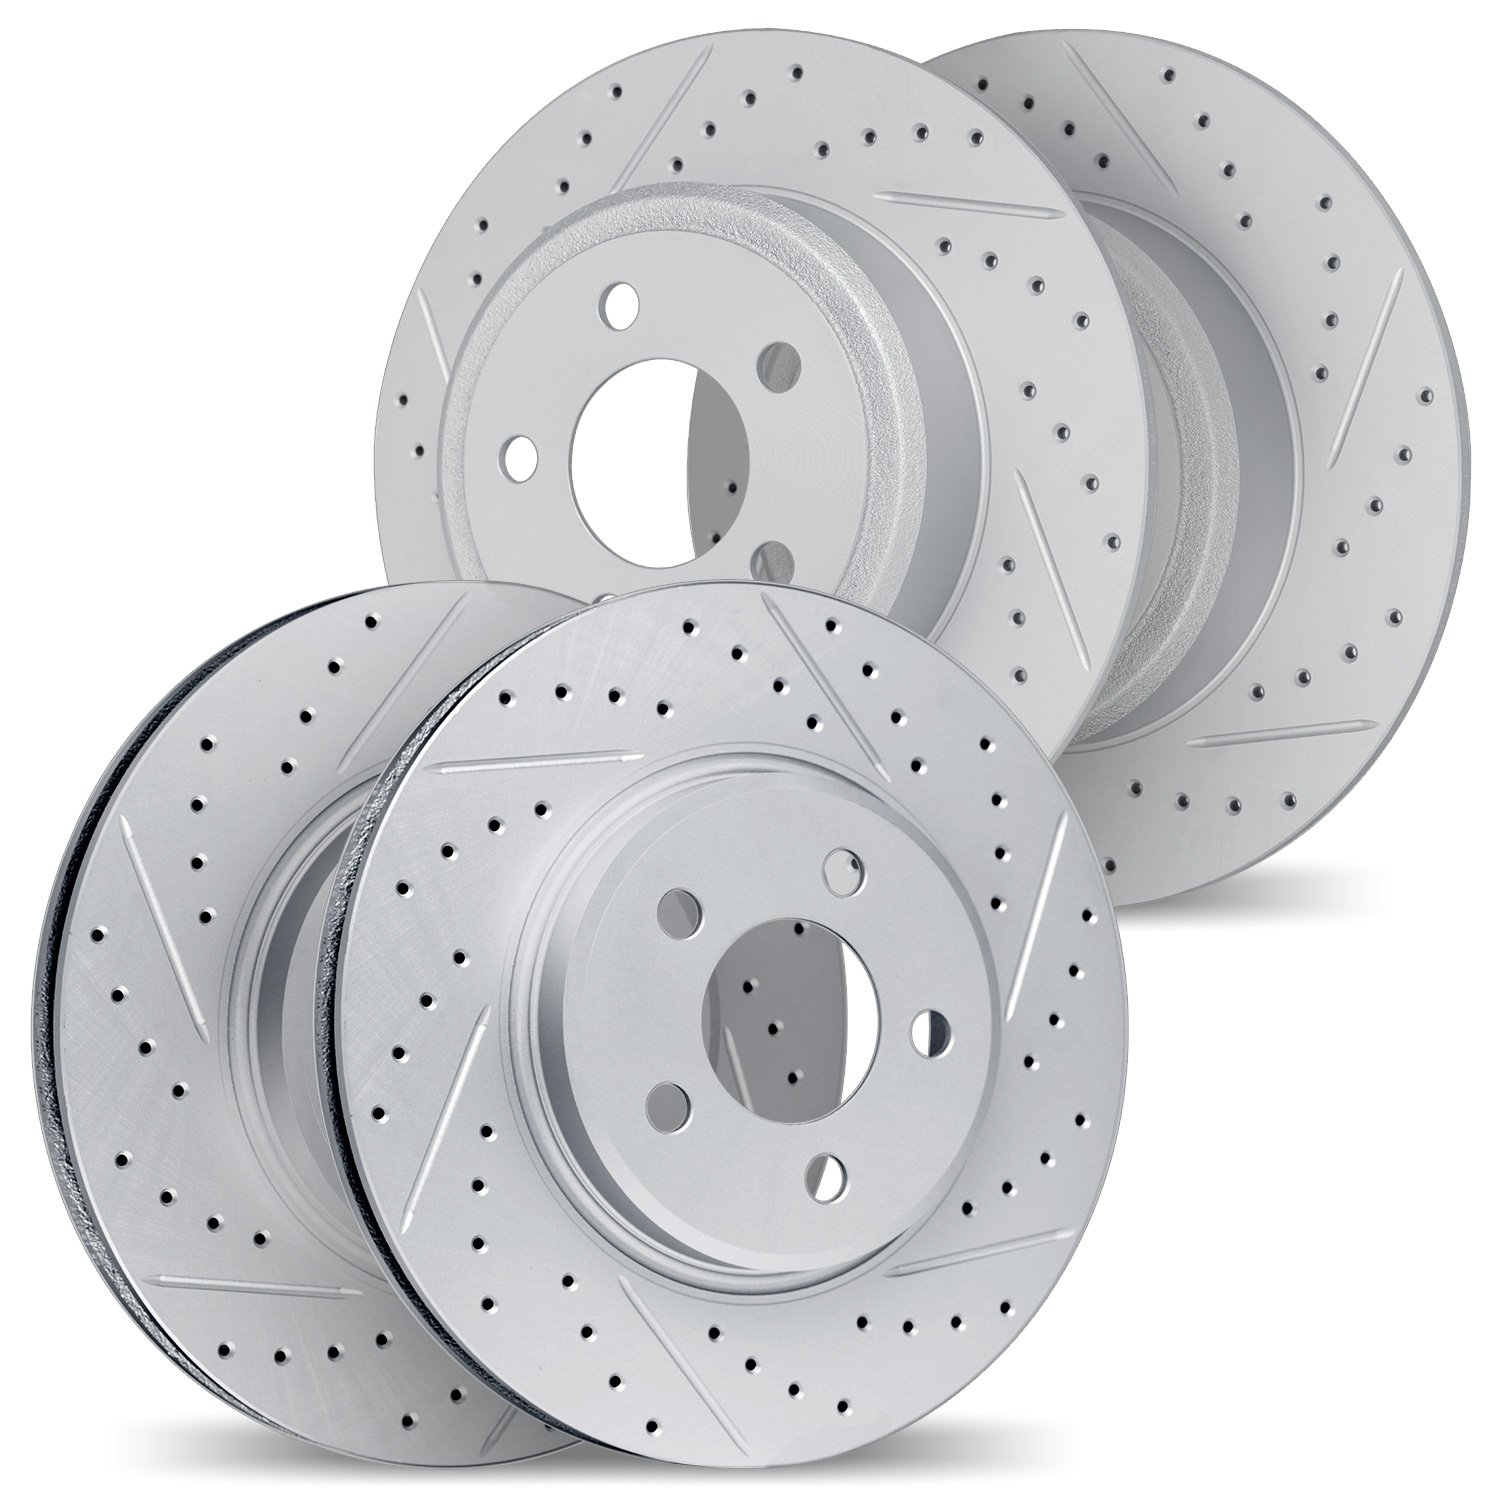 2004-59026 Geoperformance Drilled/Slotted Brake Rotors, 2013-2017 Acura/Honda, Position: Front and Rear